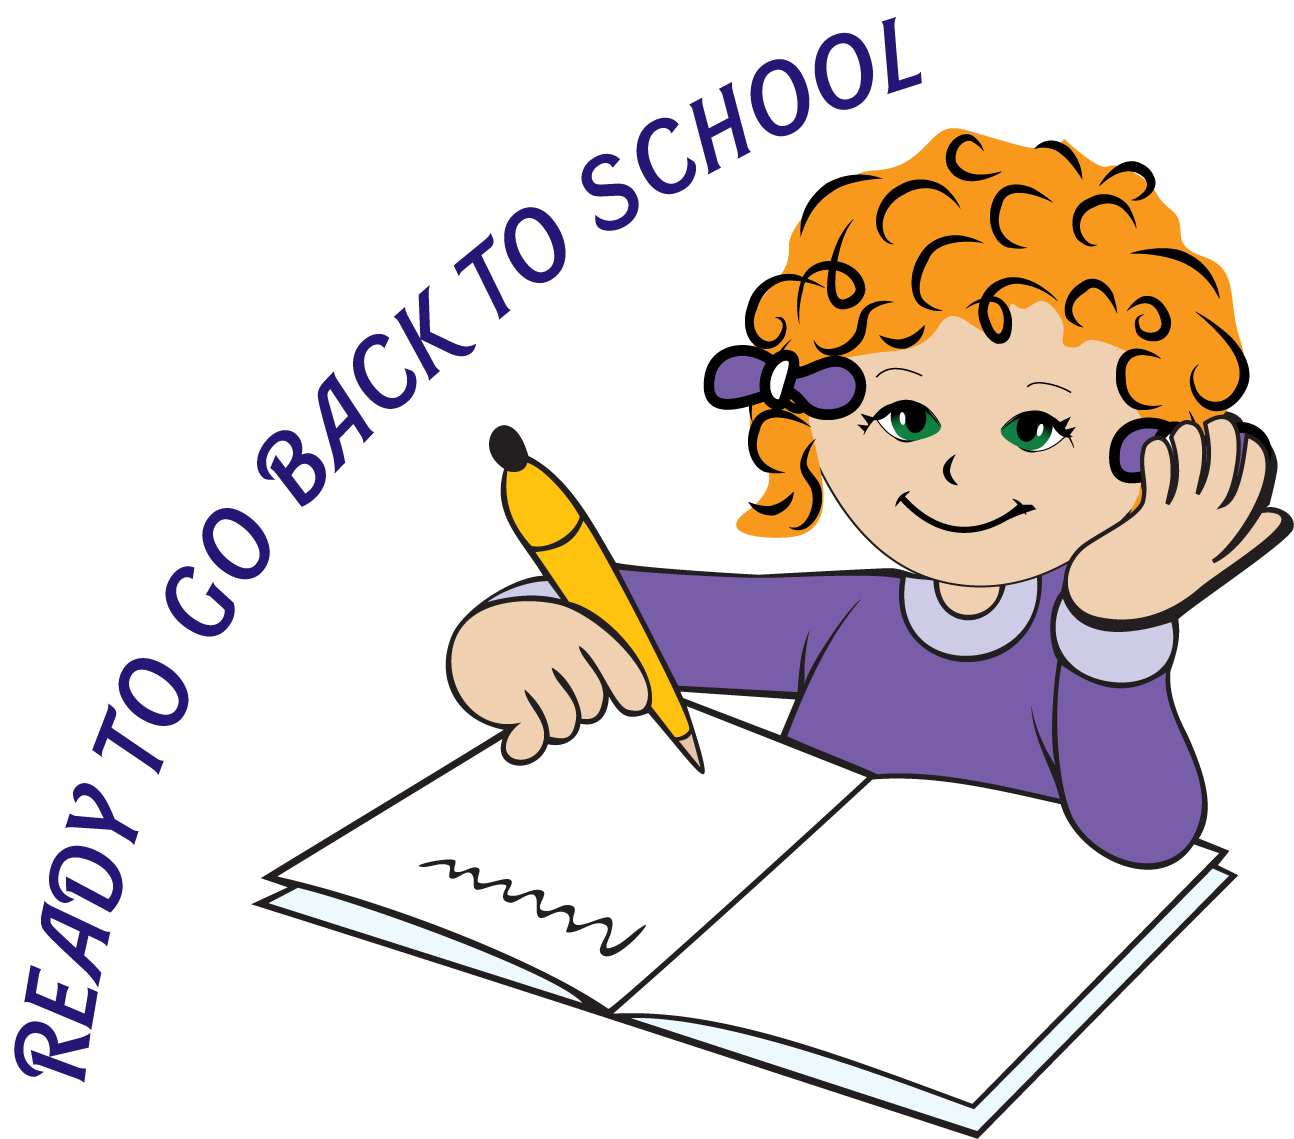 going back to school clipart - photo #38